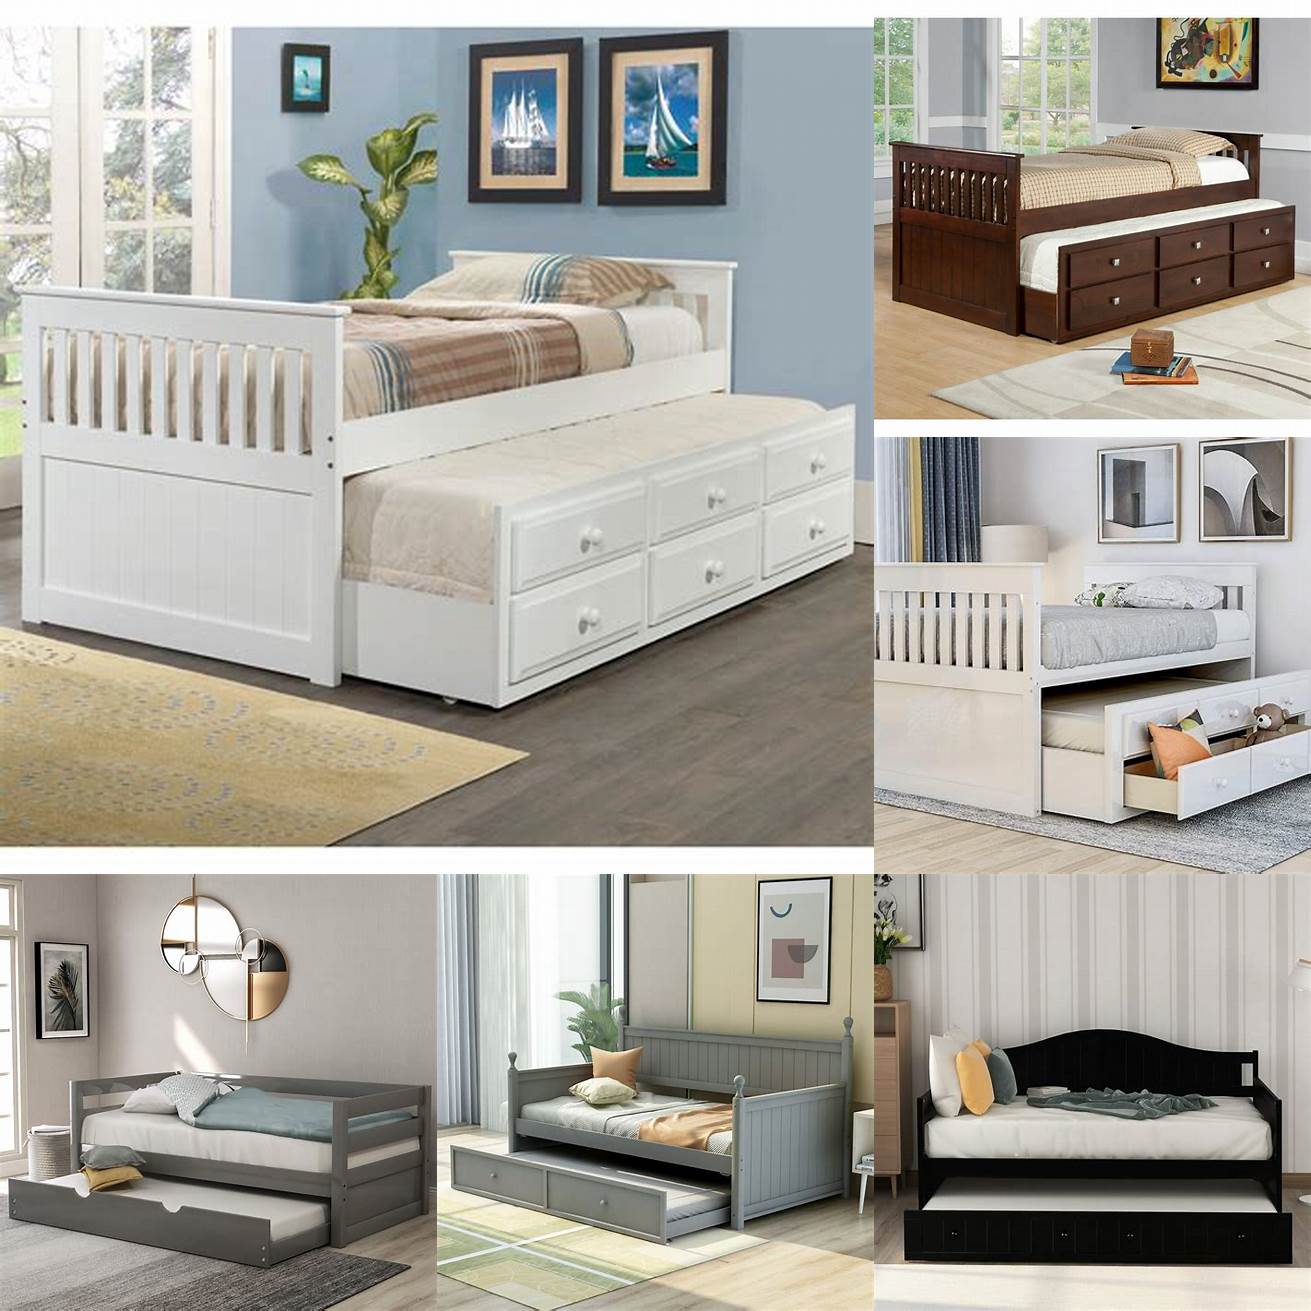 Standard twin beds with trundle are perfect for kids rooms or guest rooms